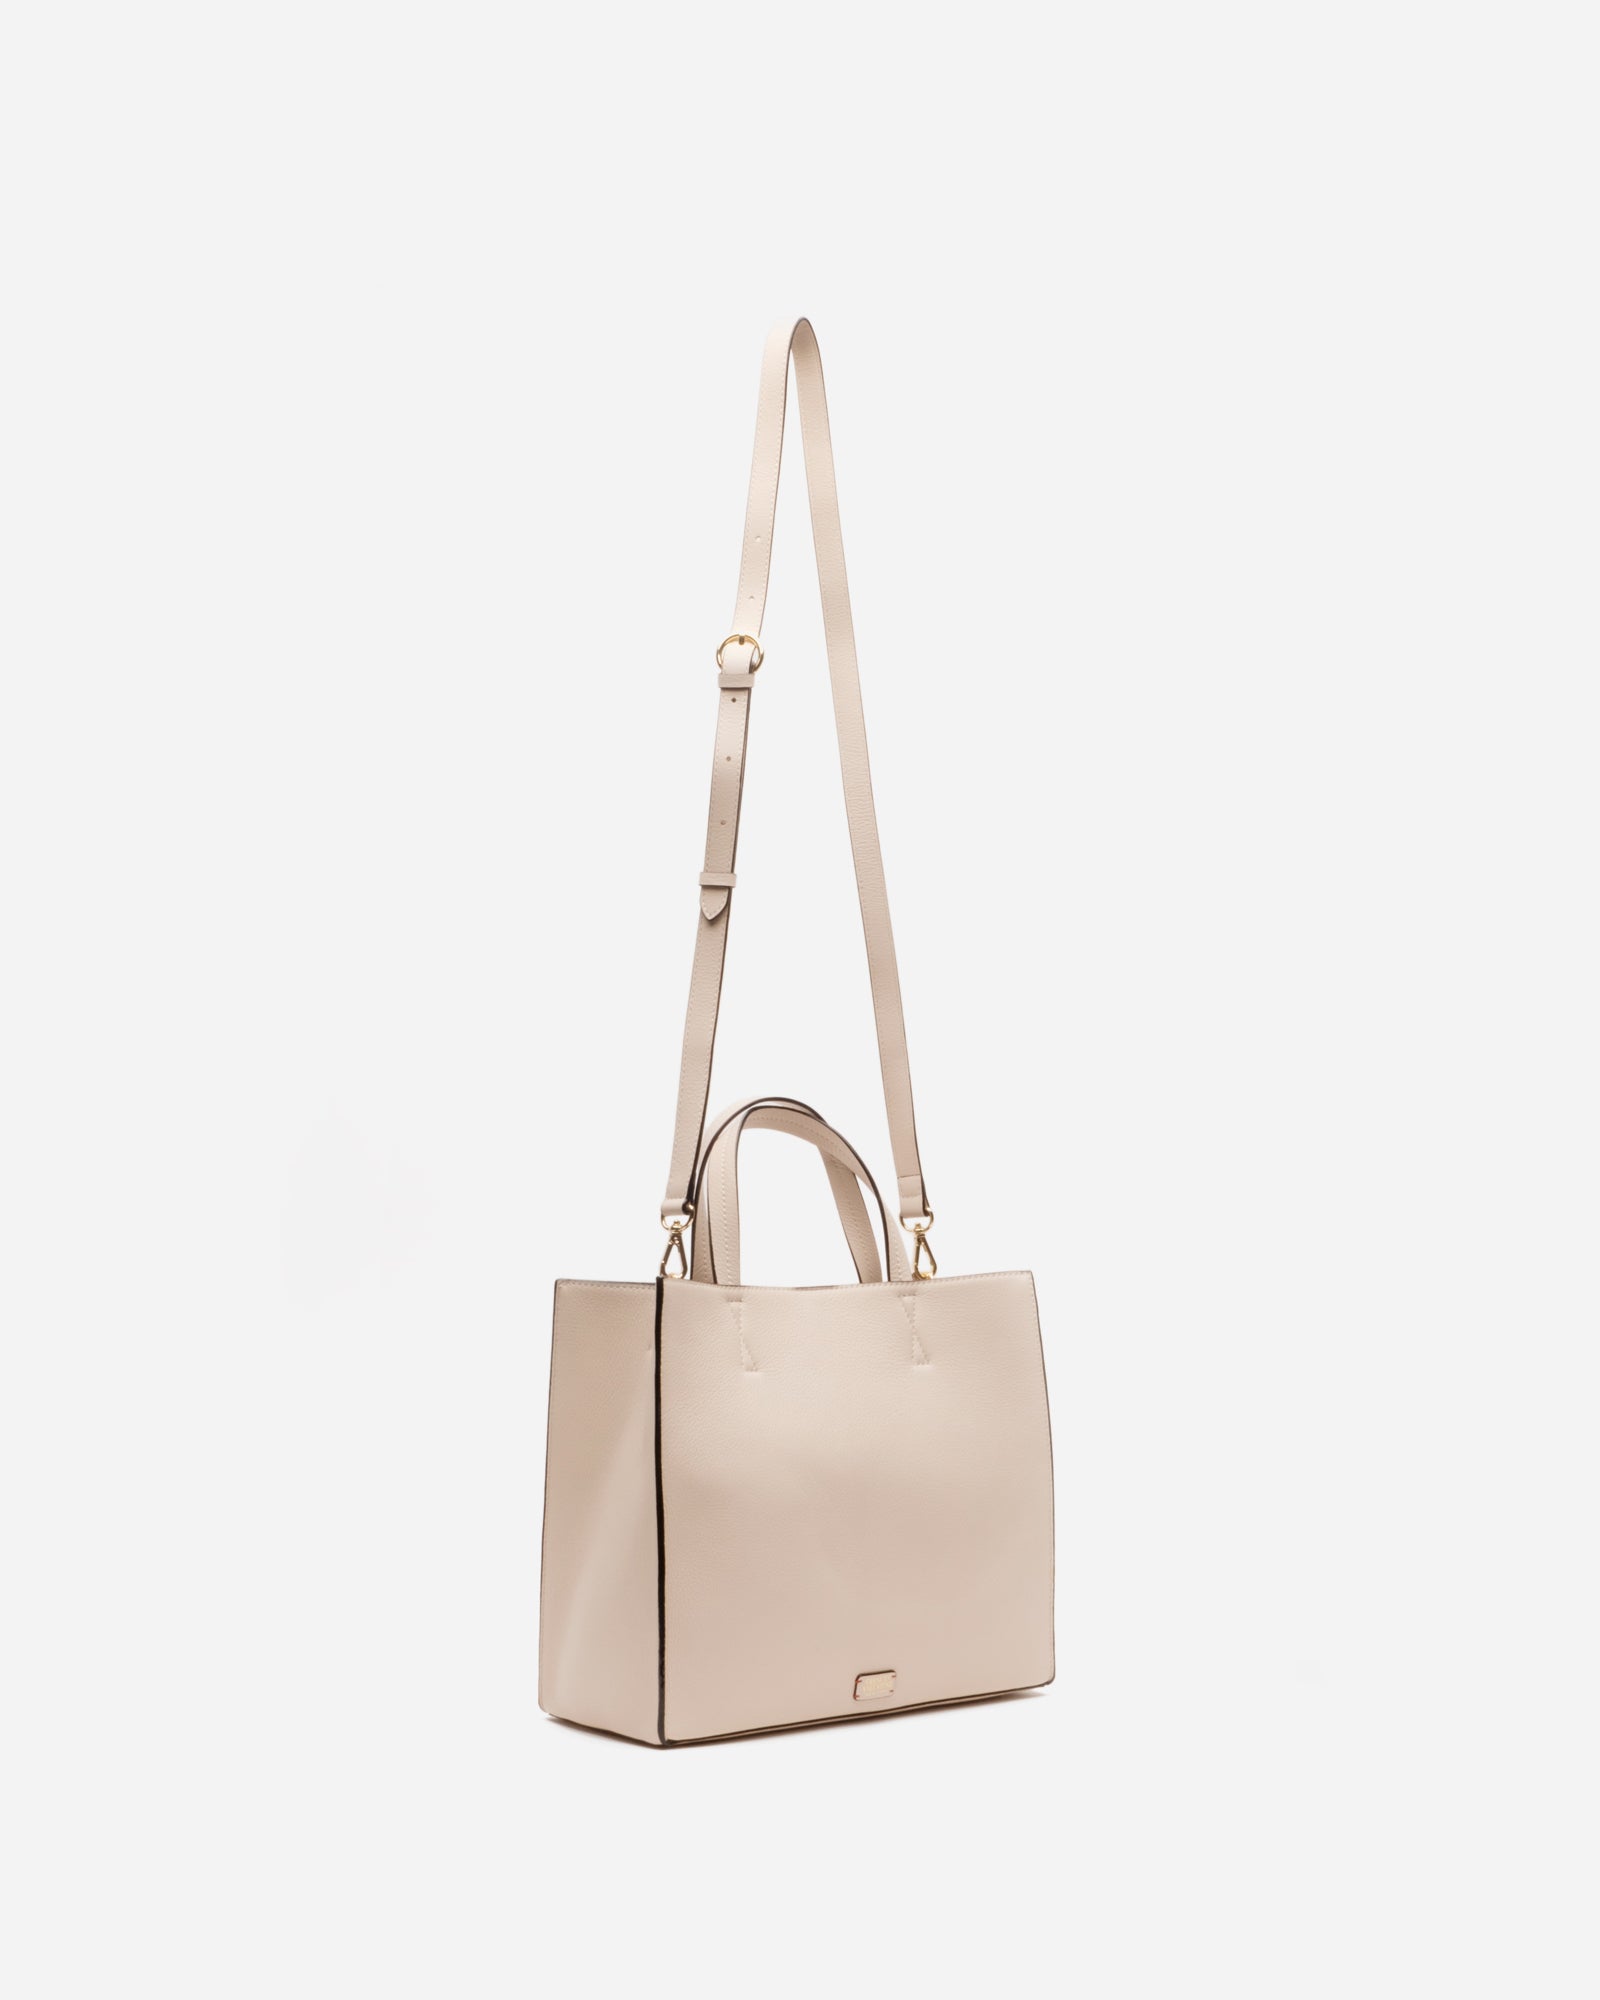 Margo Tote Tumbled Leather Oyster